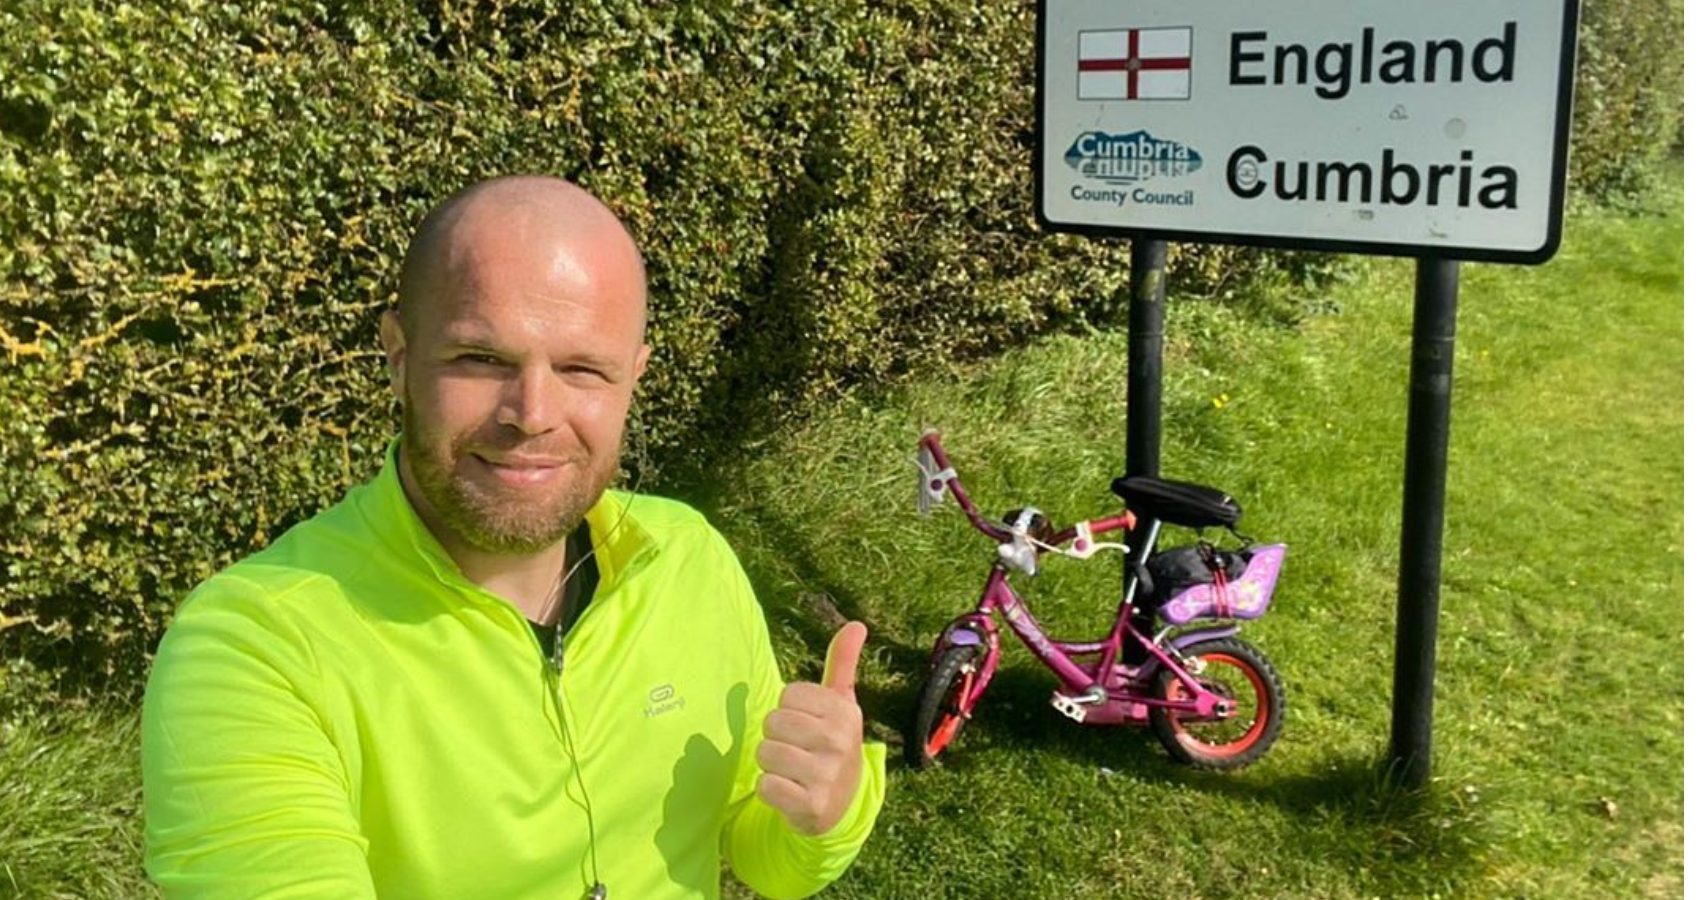 Wesley Hamnett in front of pink bike and road sign